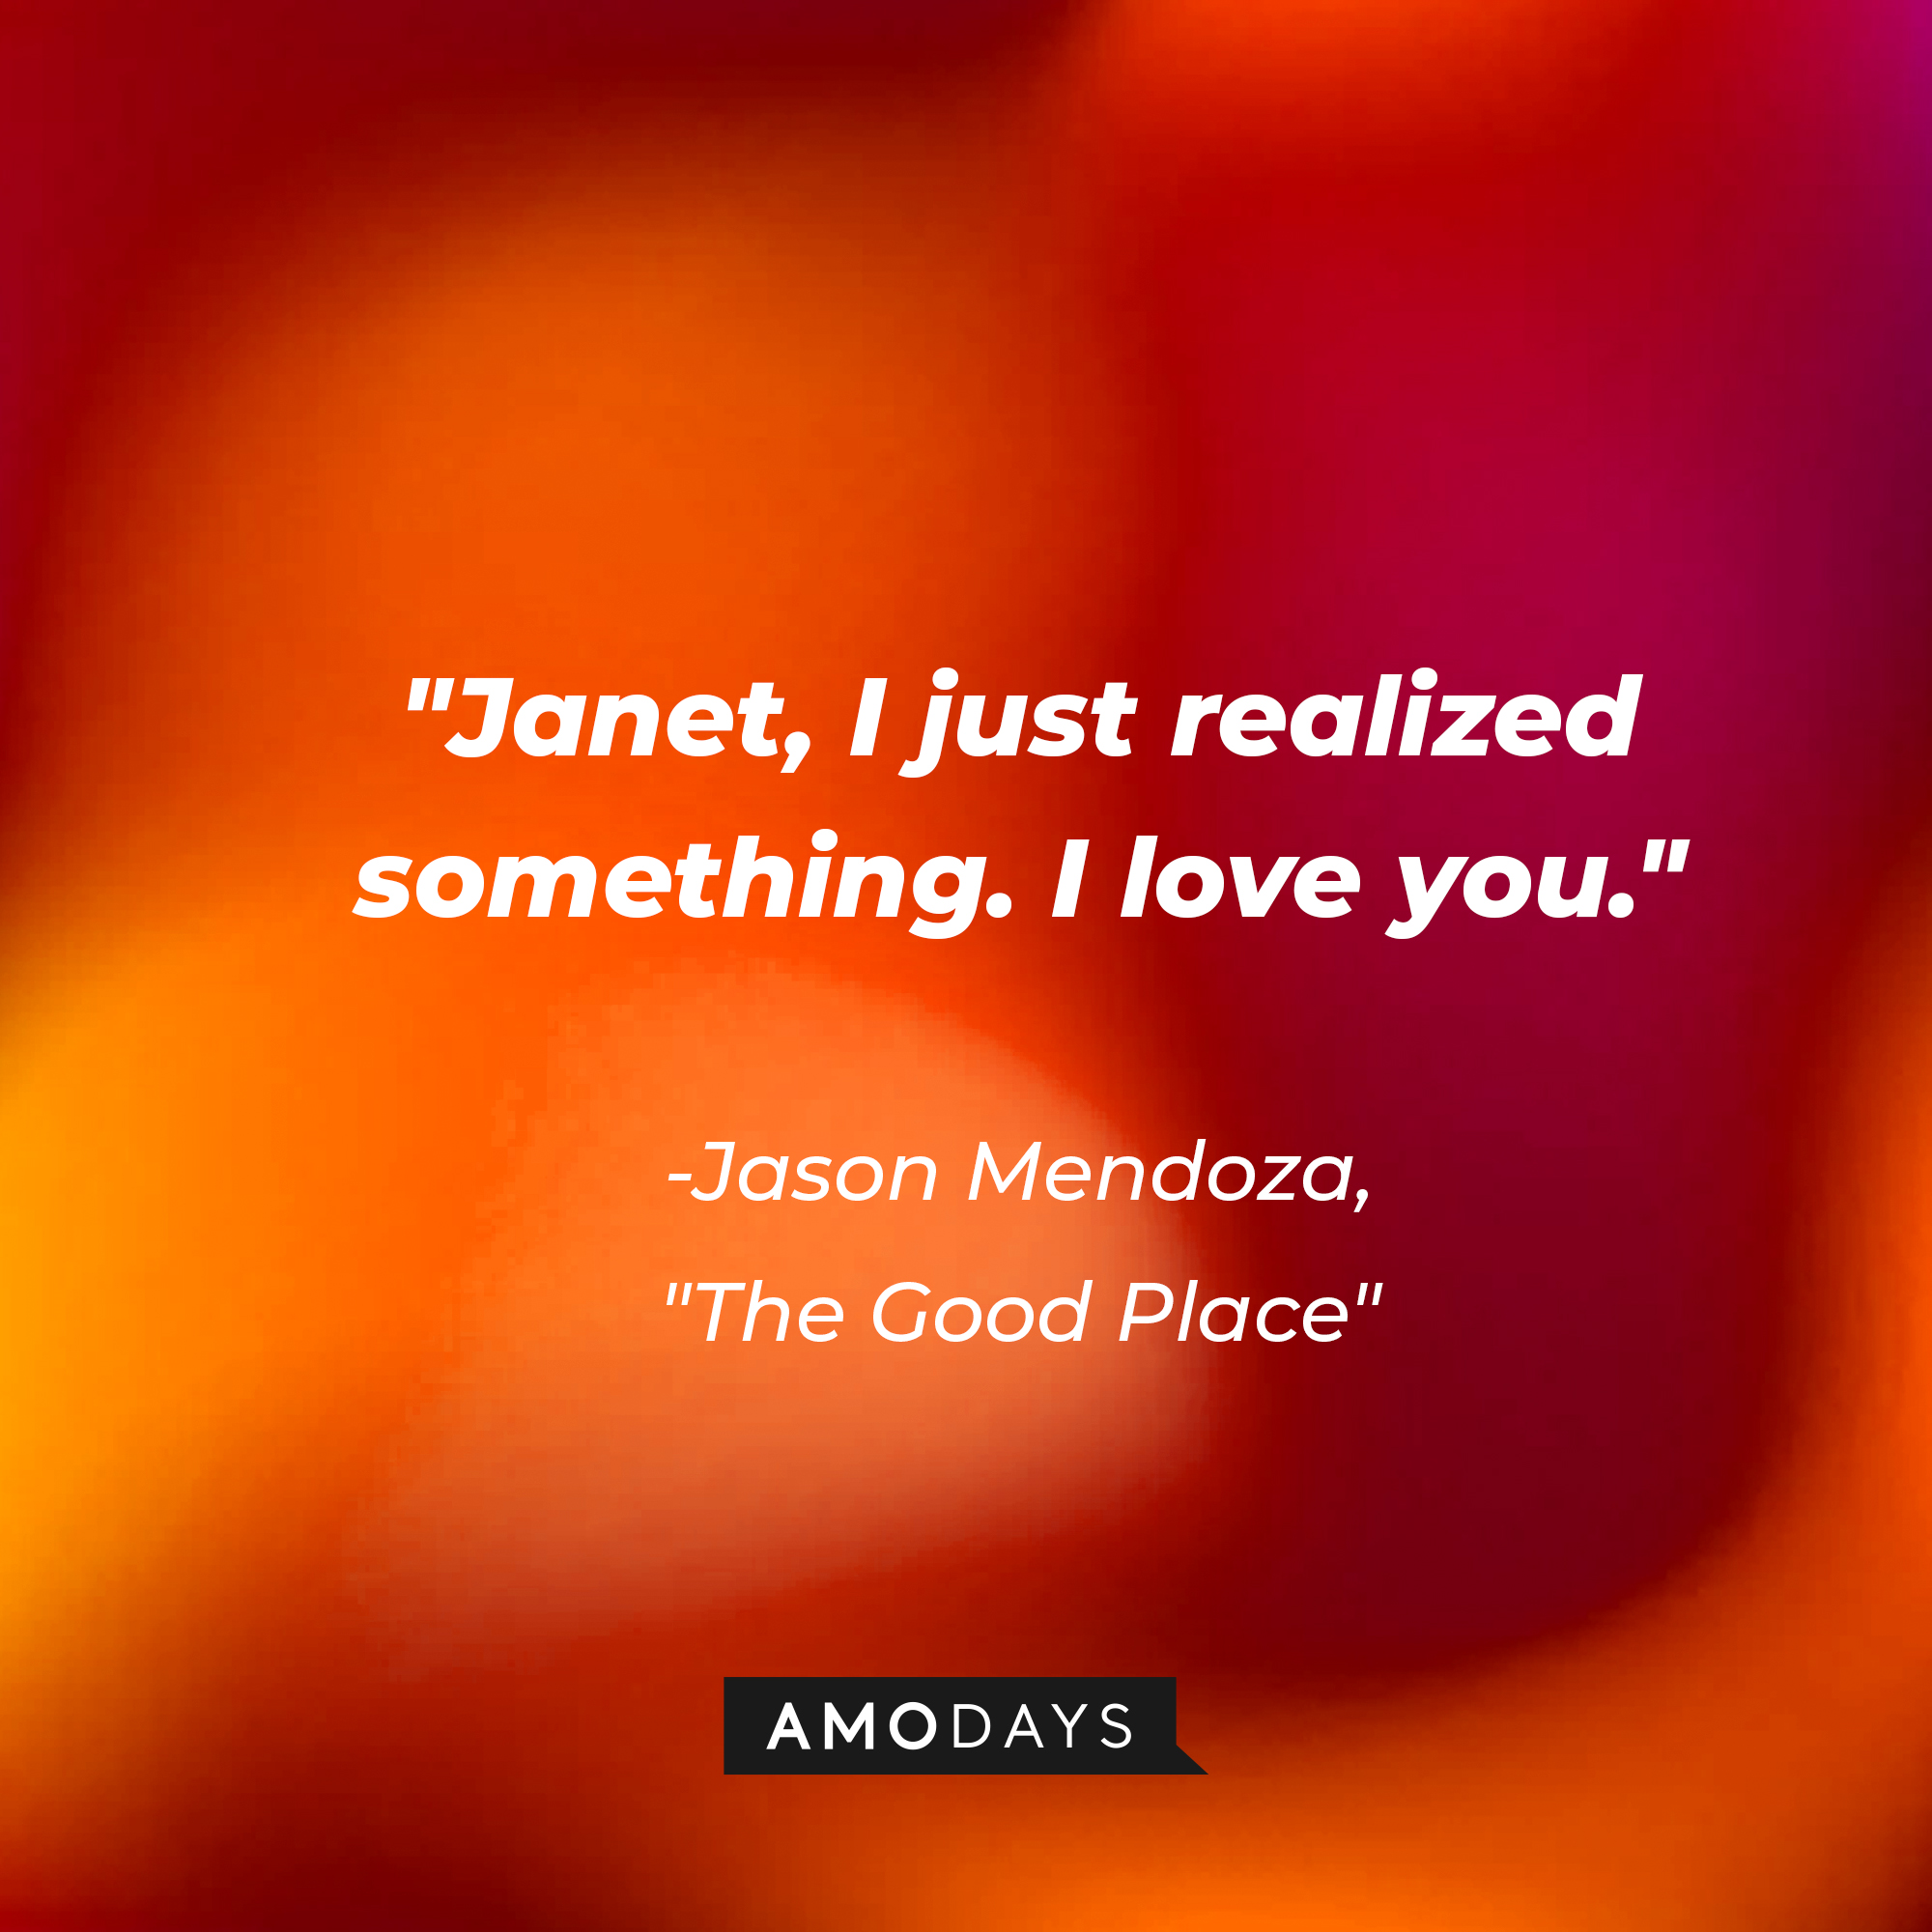 Jason Mendoza's quote in "The Good Place:" “Janet, I just realized something. I love you.” | Source: Amodays